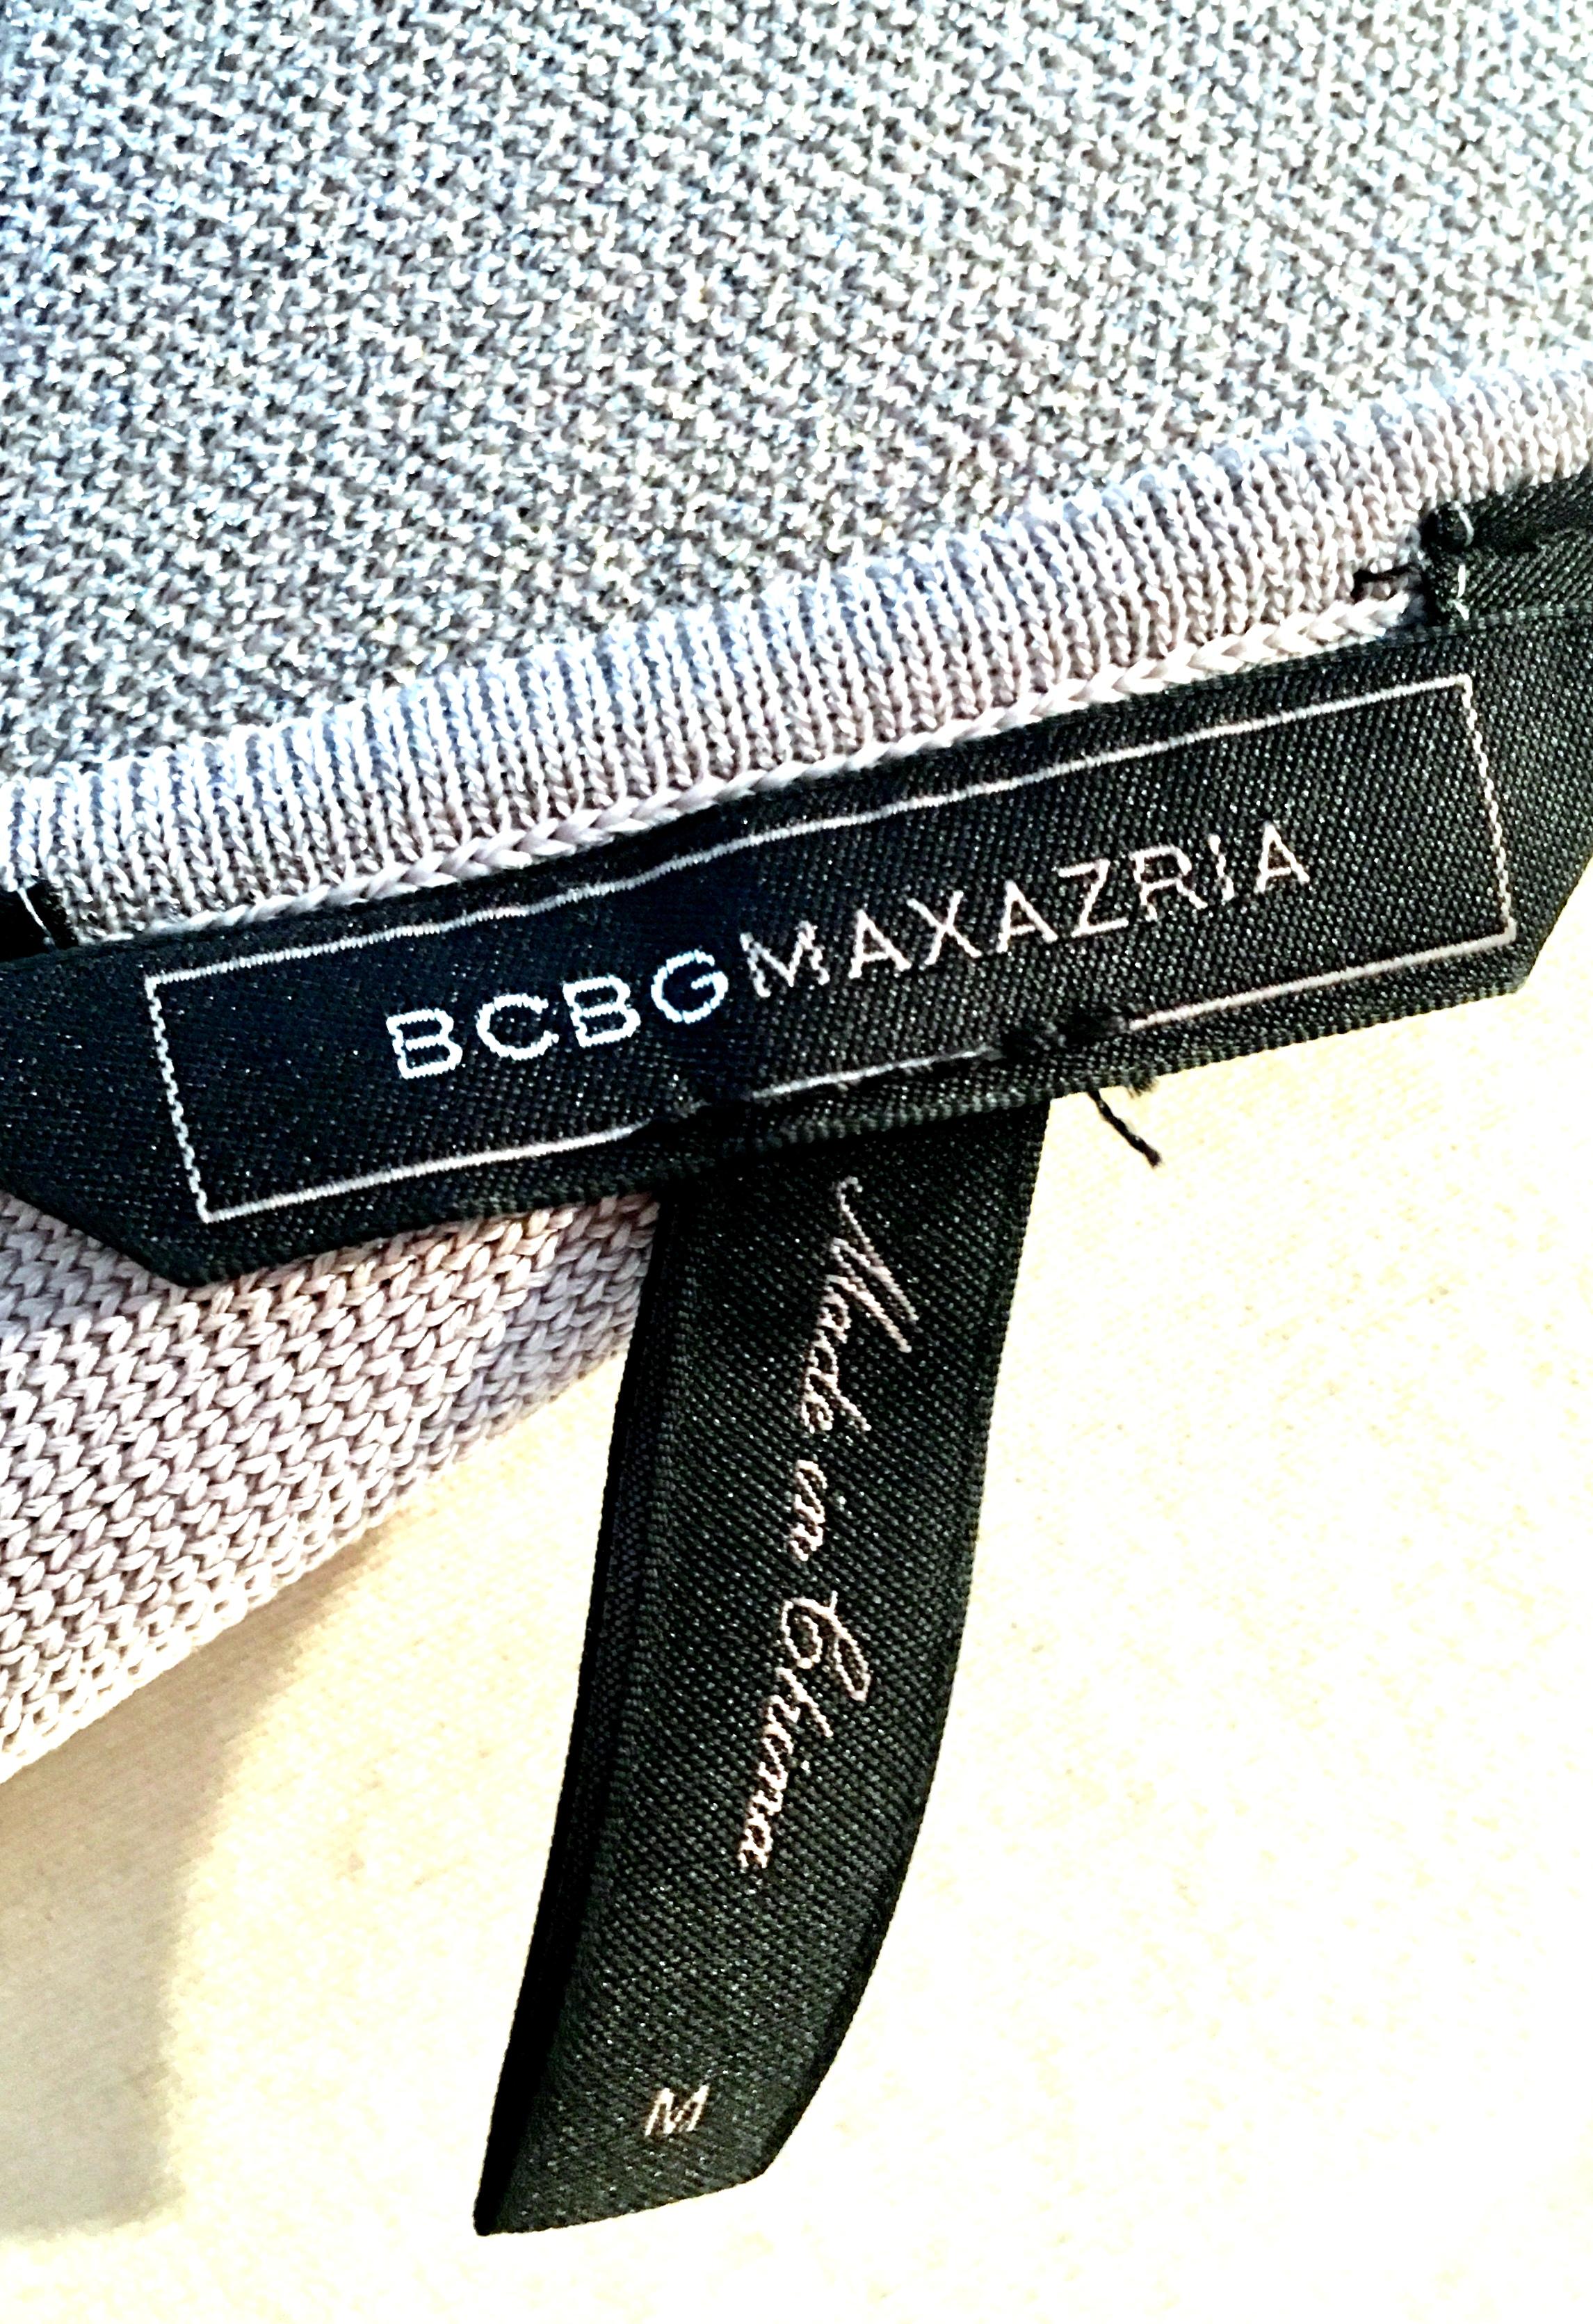 21st Century Herve Leger Style Metallic Cocktail Dress By Maxazria For BCBG  For Sale 9